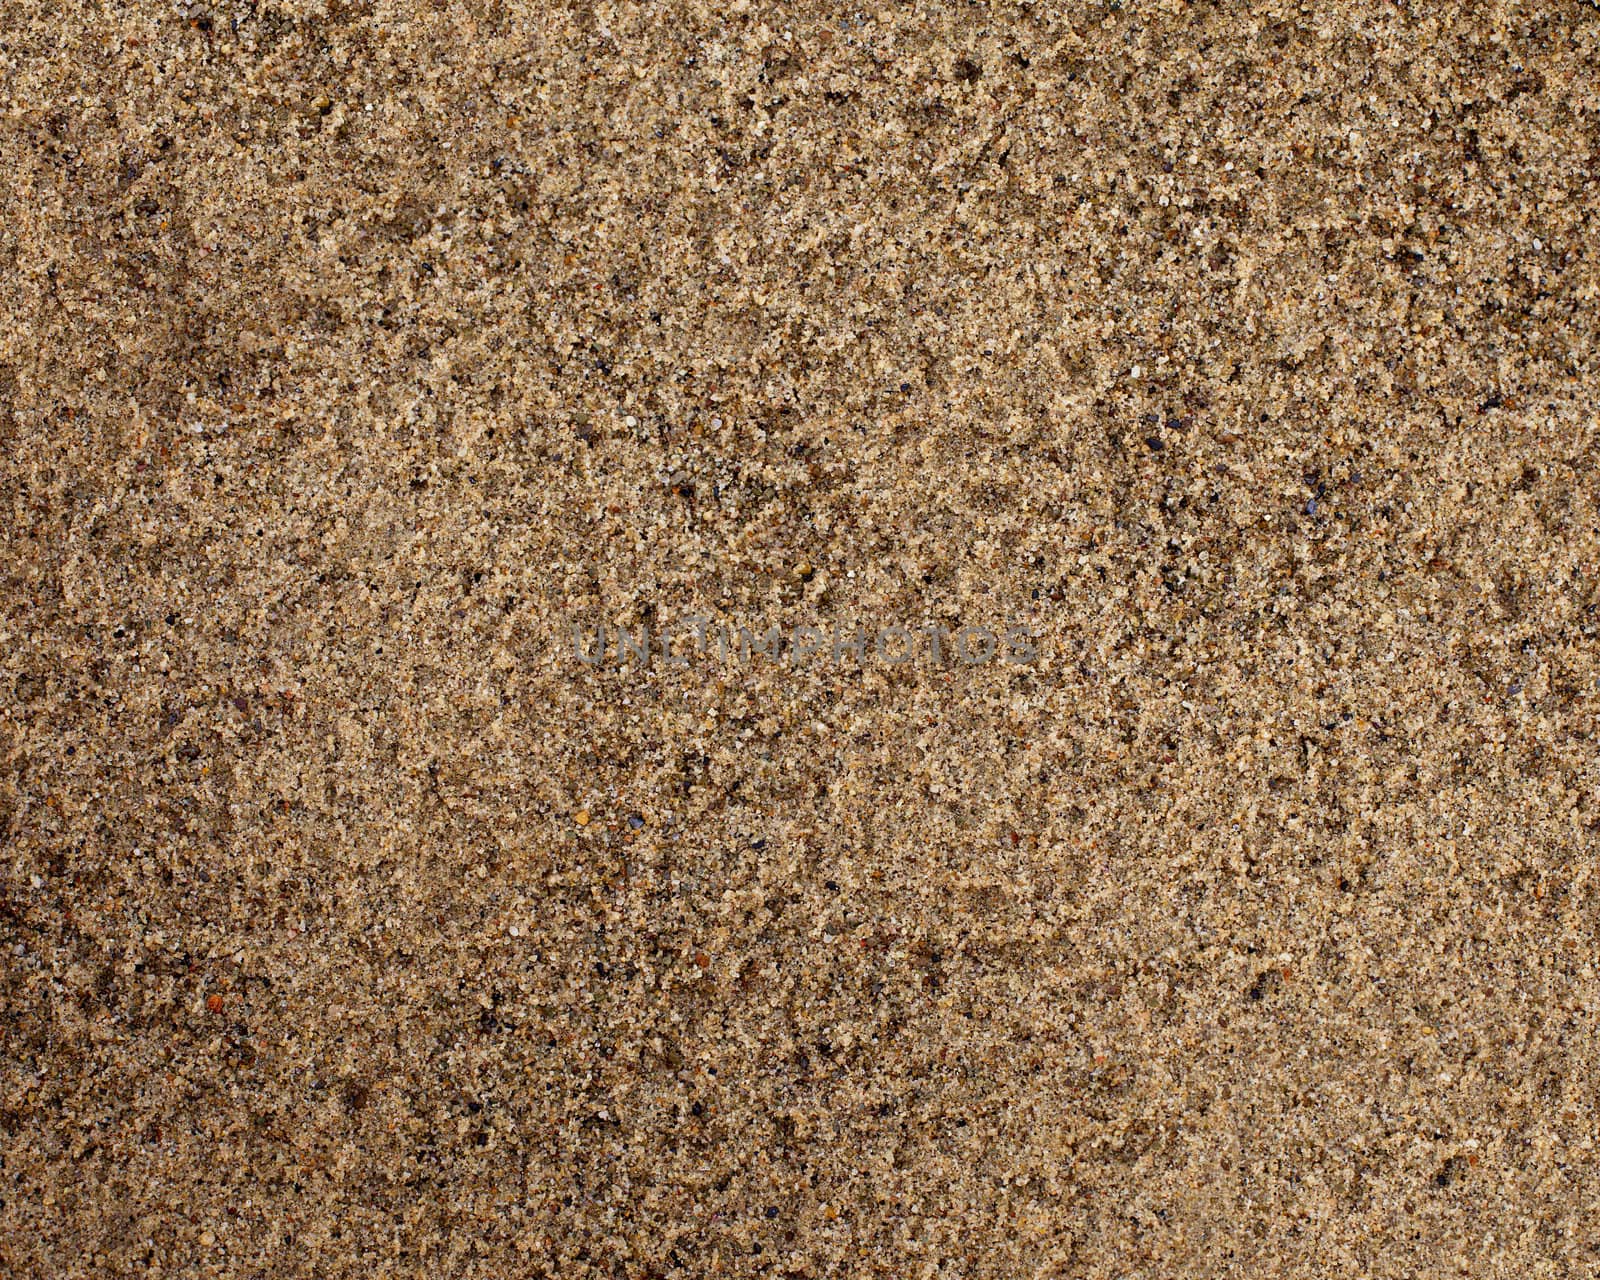 Rough sand texture background from close up